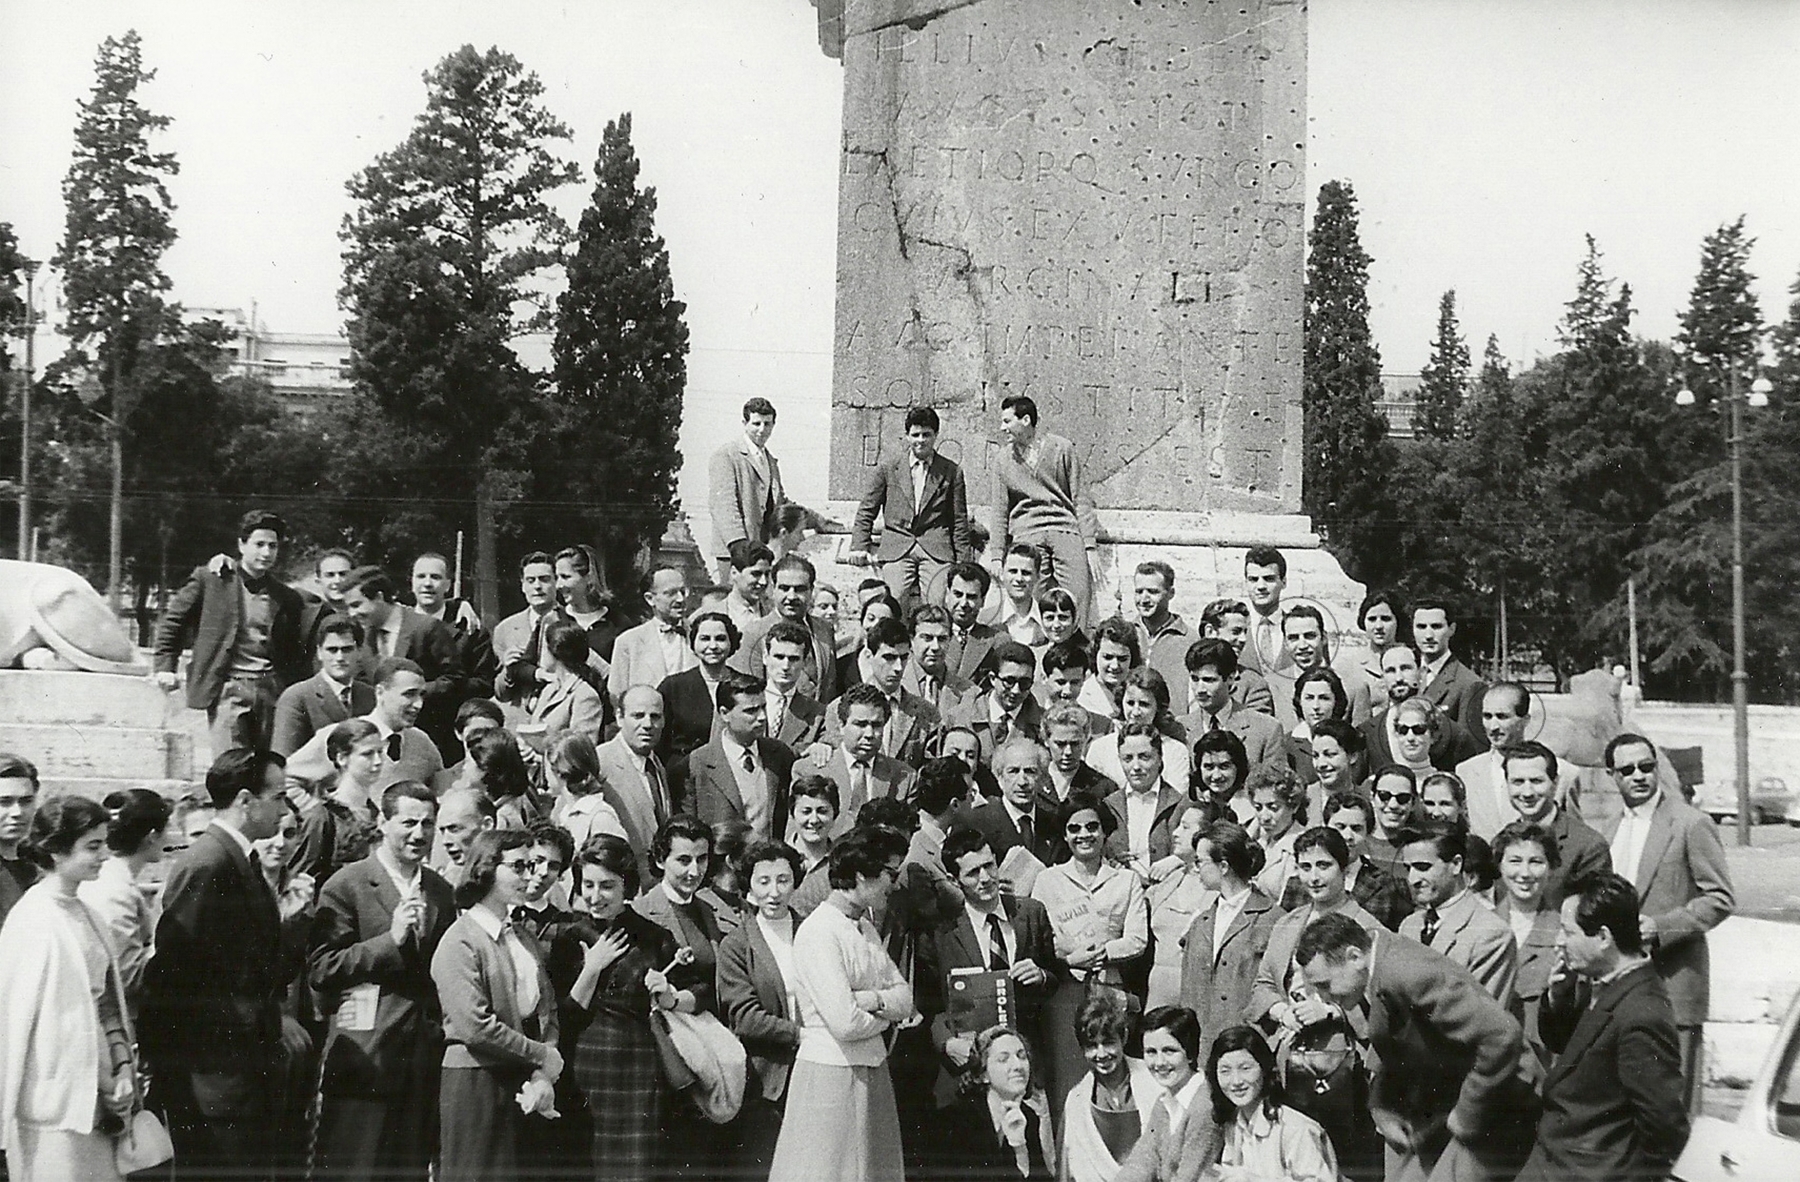 Group photo of students of the&nbsp;Academy of Fine Arts in Rome. Among the students are&nbsp;Mamdouh Kashlan, Mahmoud Hammad, Derrie Fakhoury Hammad,&nbsp;Mahmoud Daadoush, Louay Kayyali, Fateh al-Moudarres and the professor of art history in the middle. Rome, May 1957.